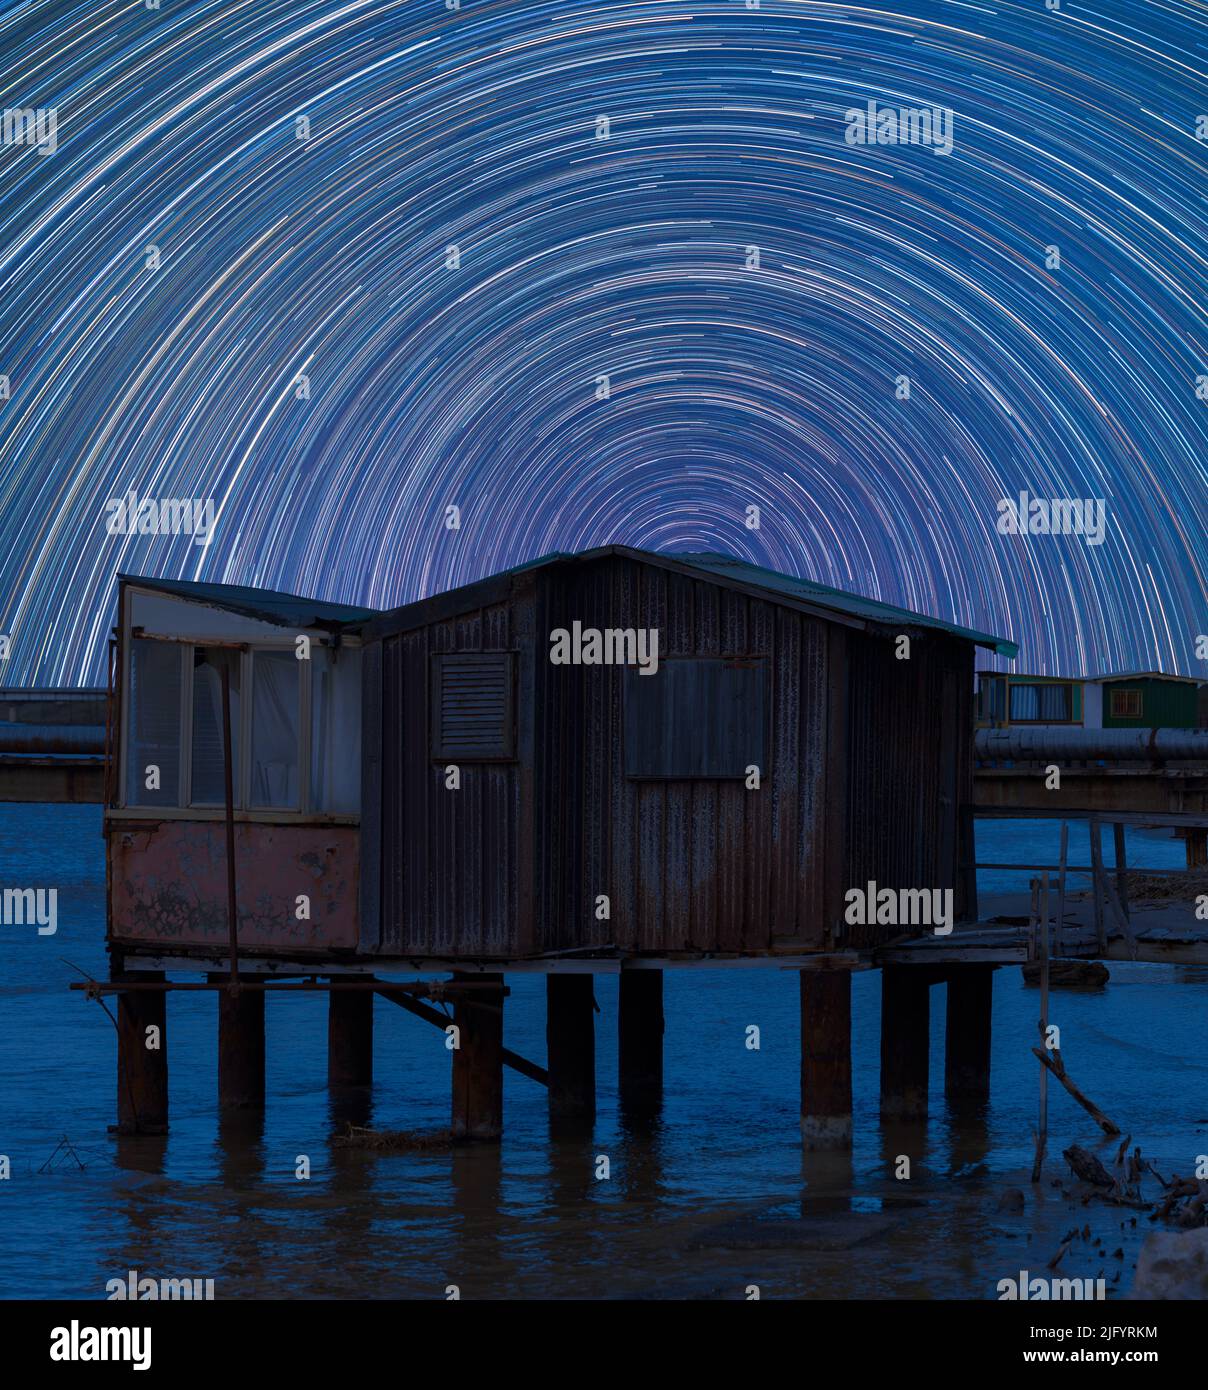 Star trails in the night sky in Italy. Movement of the stars behind an old metal and wooden fishing shed standing in the water Stock Photo